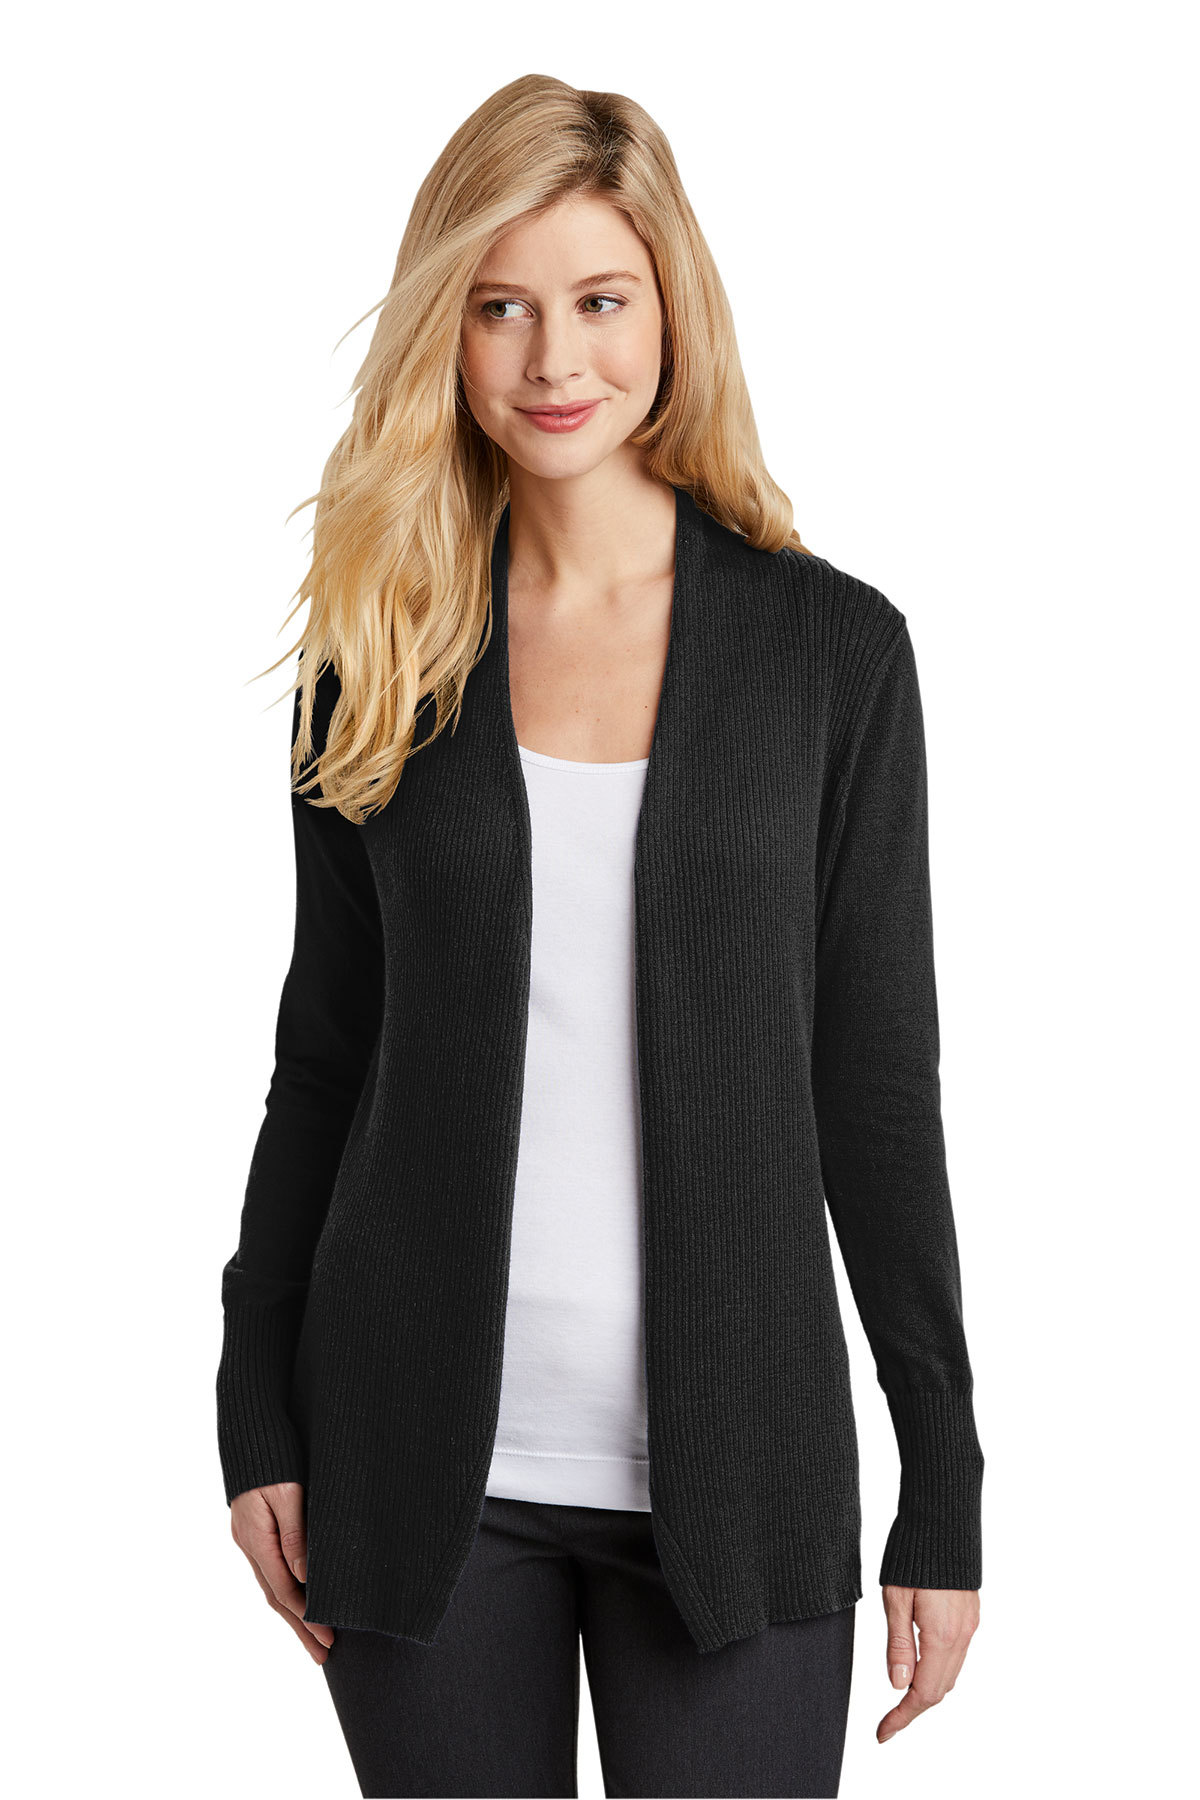 Port Authority Ladies Open Front Cardigan Sweater, Product